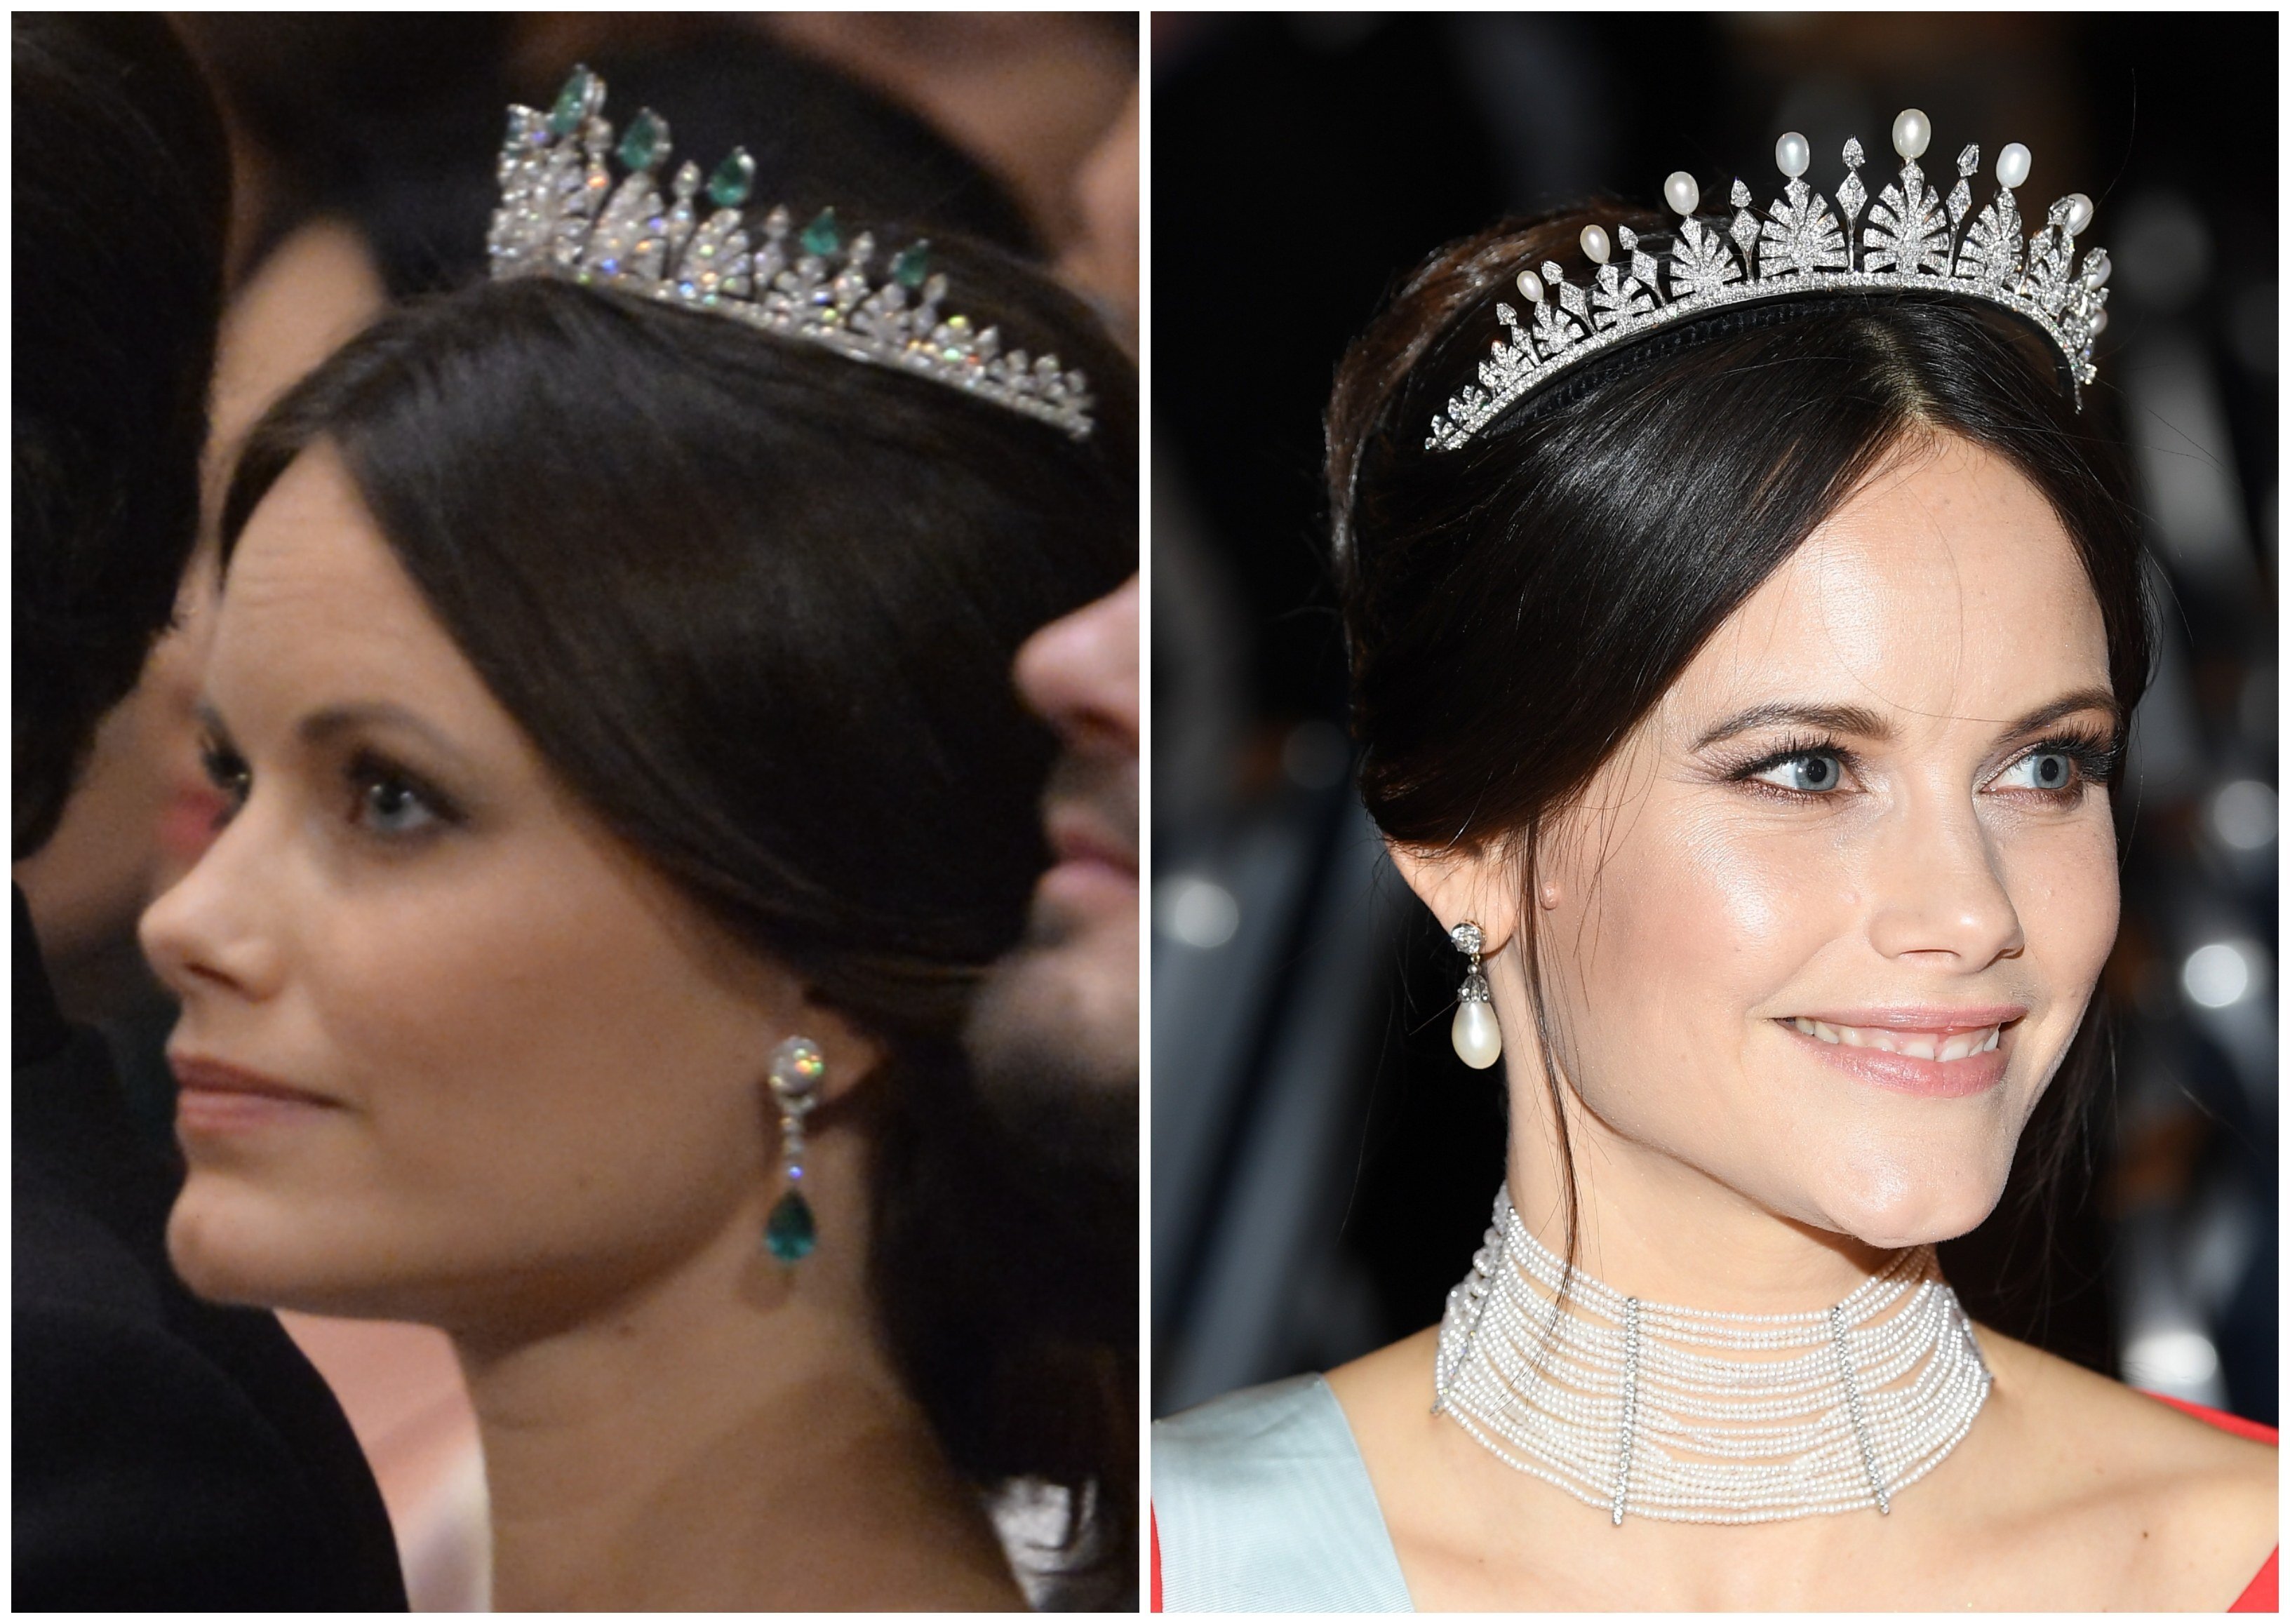 Feast your eyes on some of Princess Sofia of Sweden’s most dazzling jewels. Photos: AP, Getty